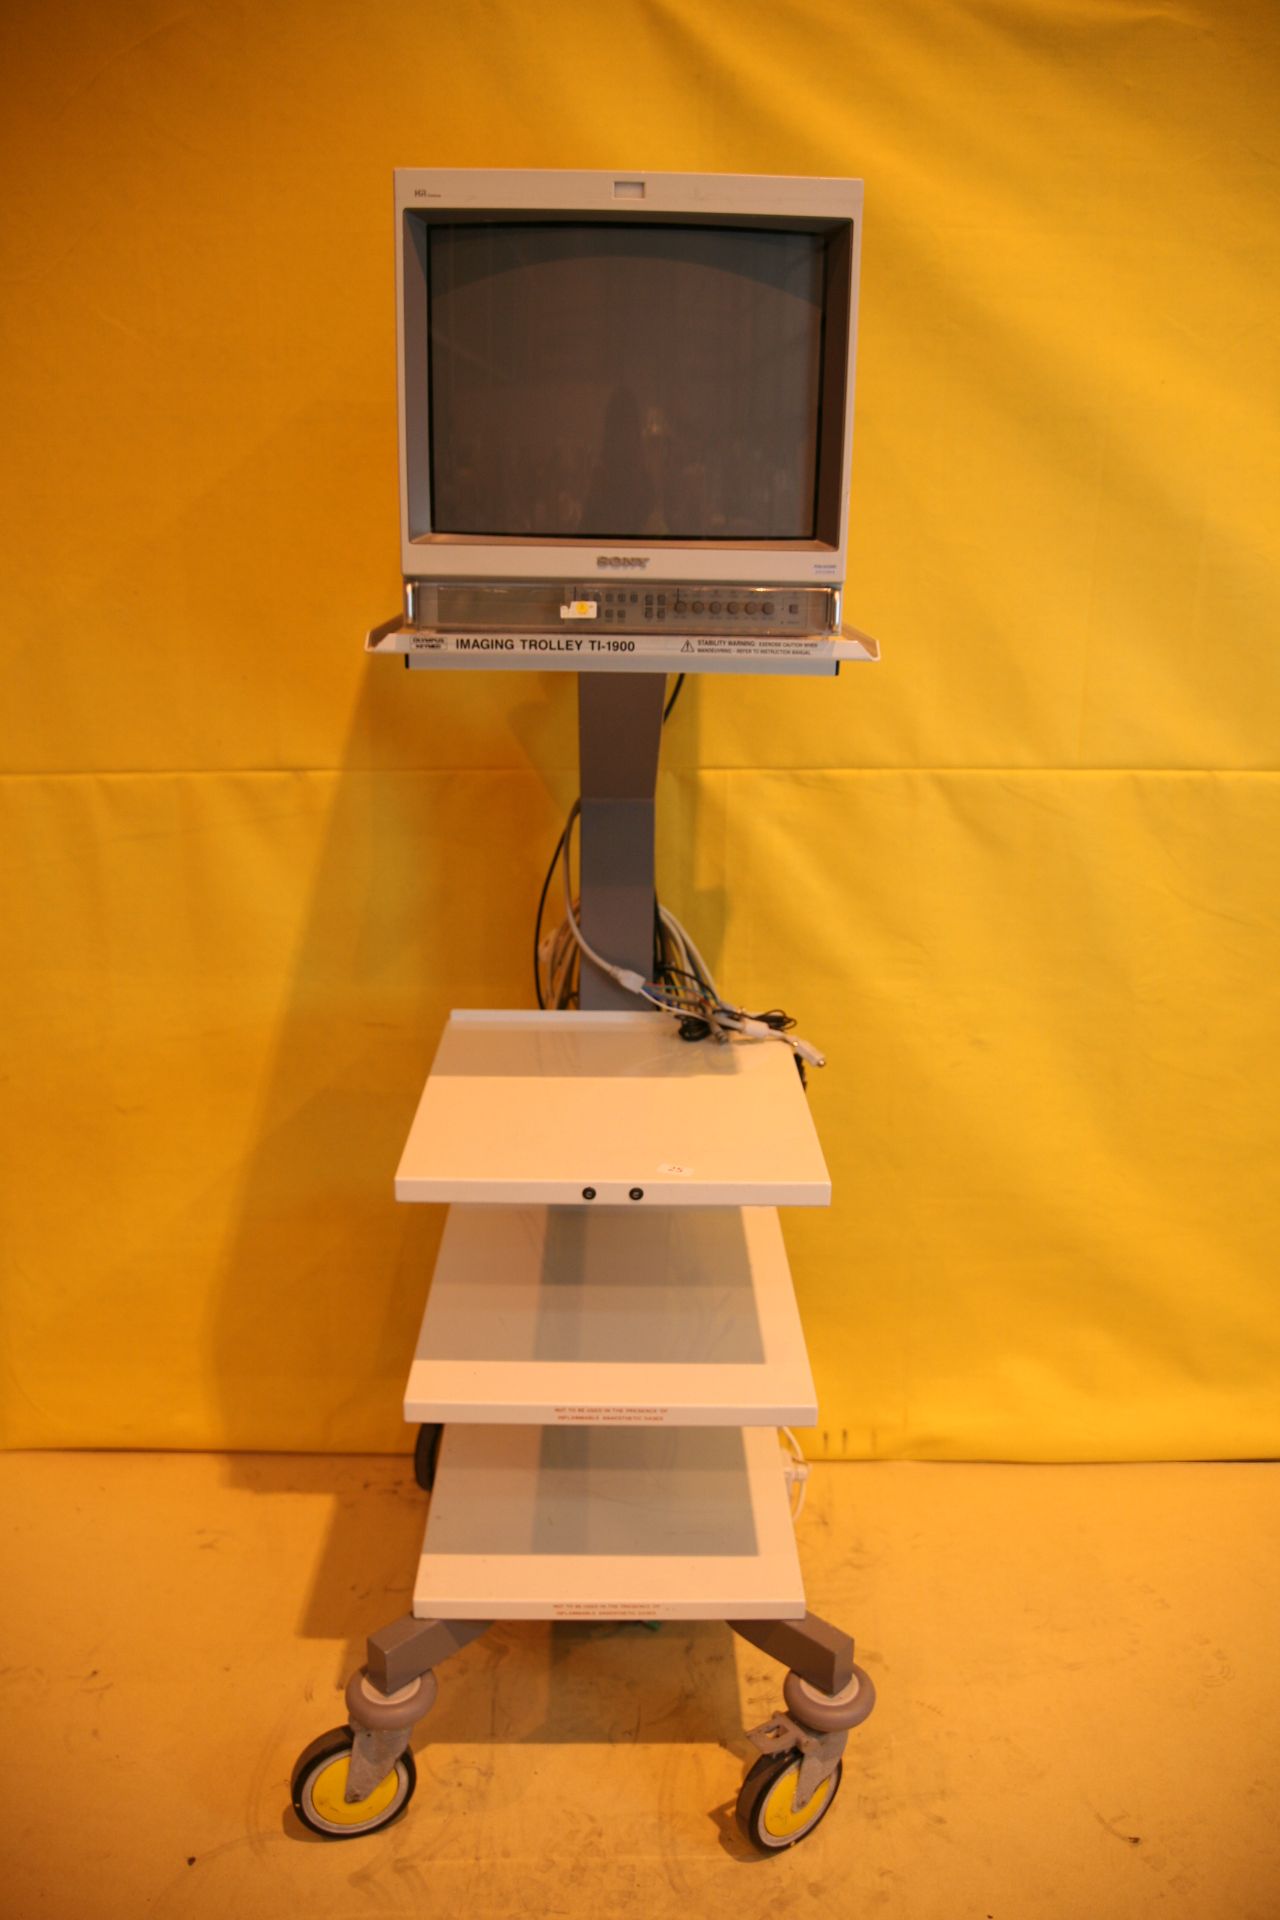 Olympus Stack Tolley TI-1900 with Sony HR Trinitron Monitor